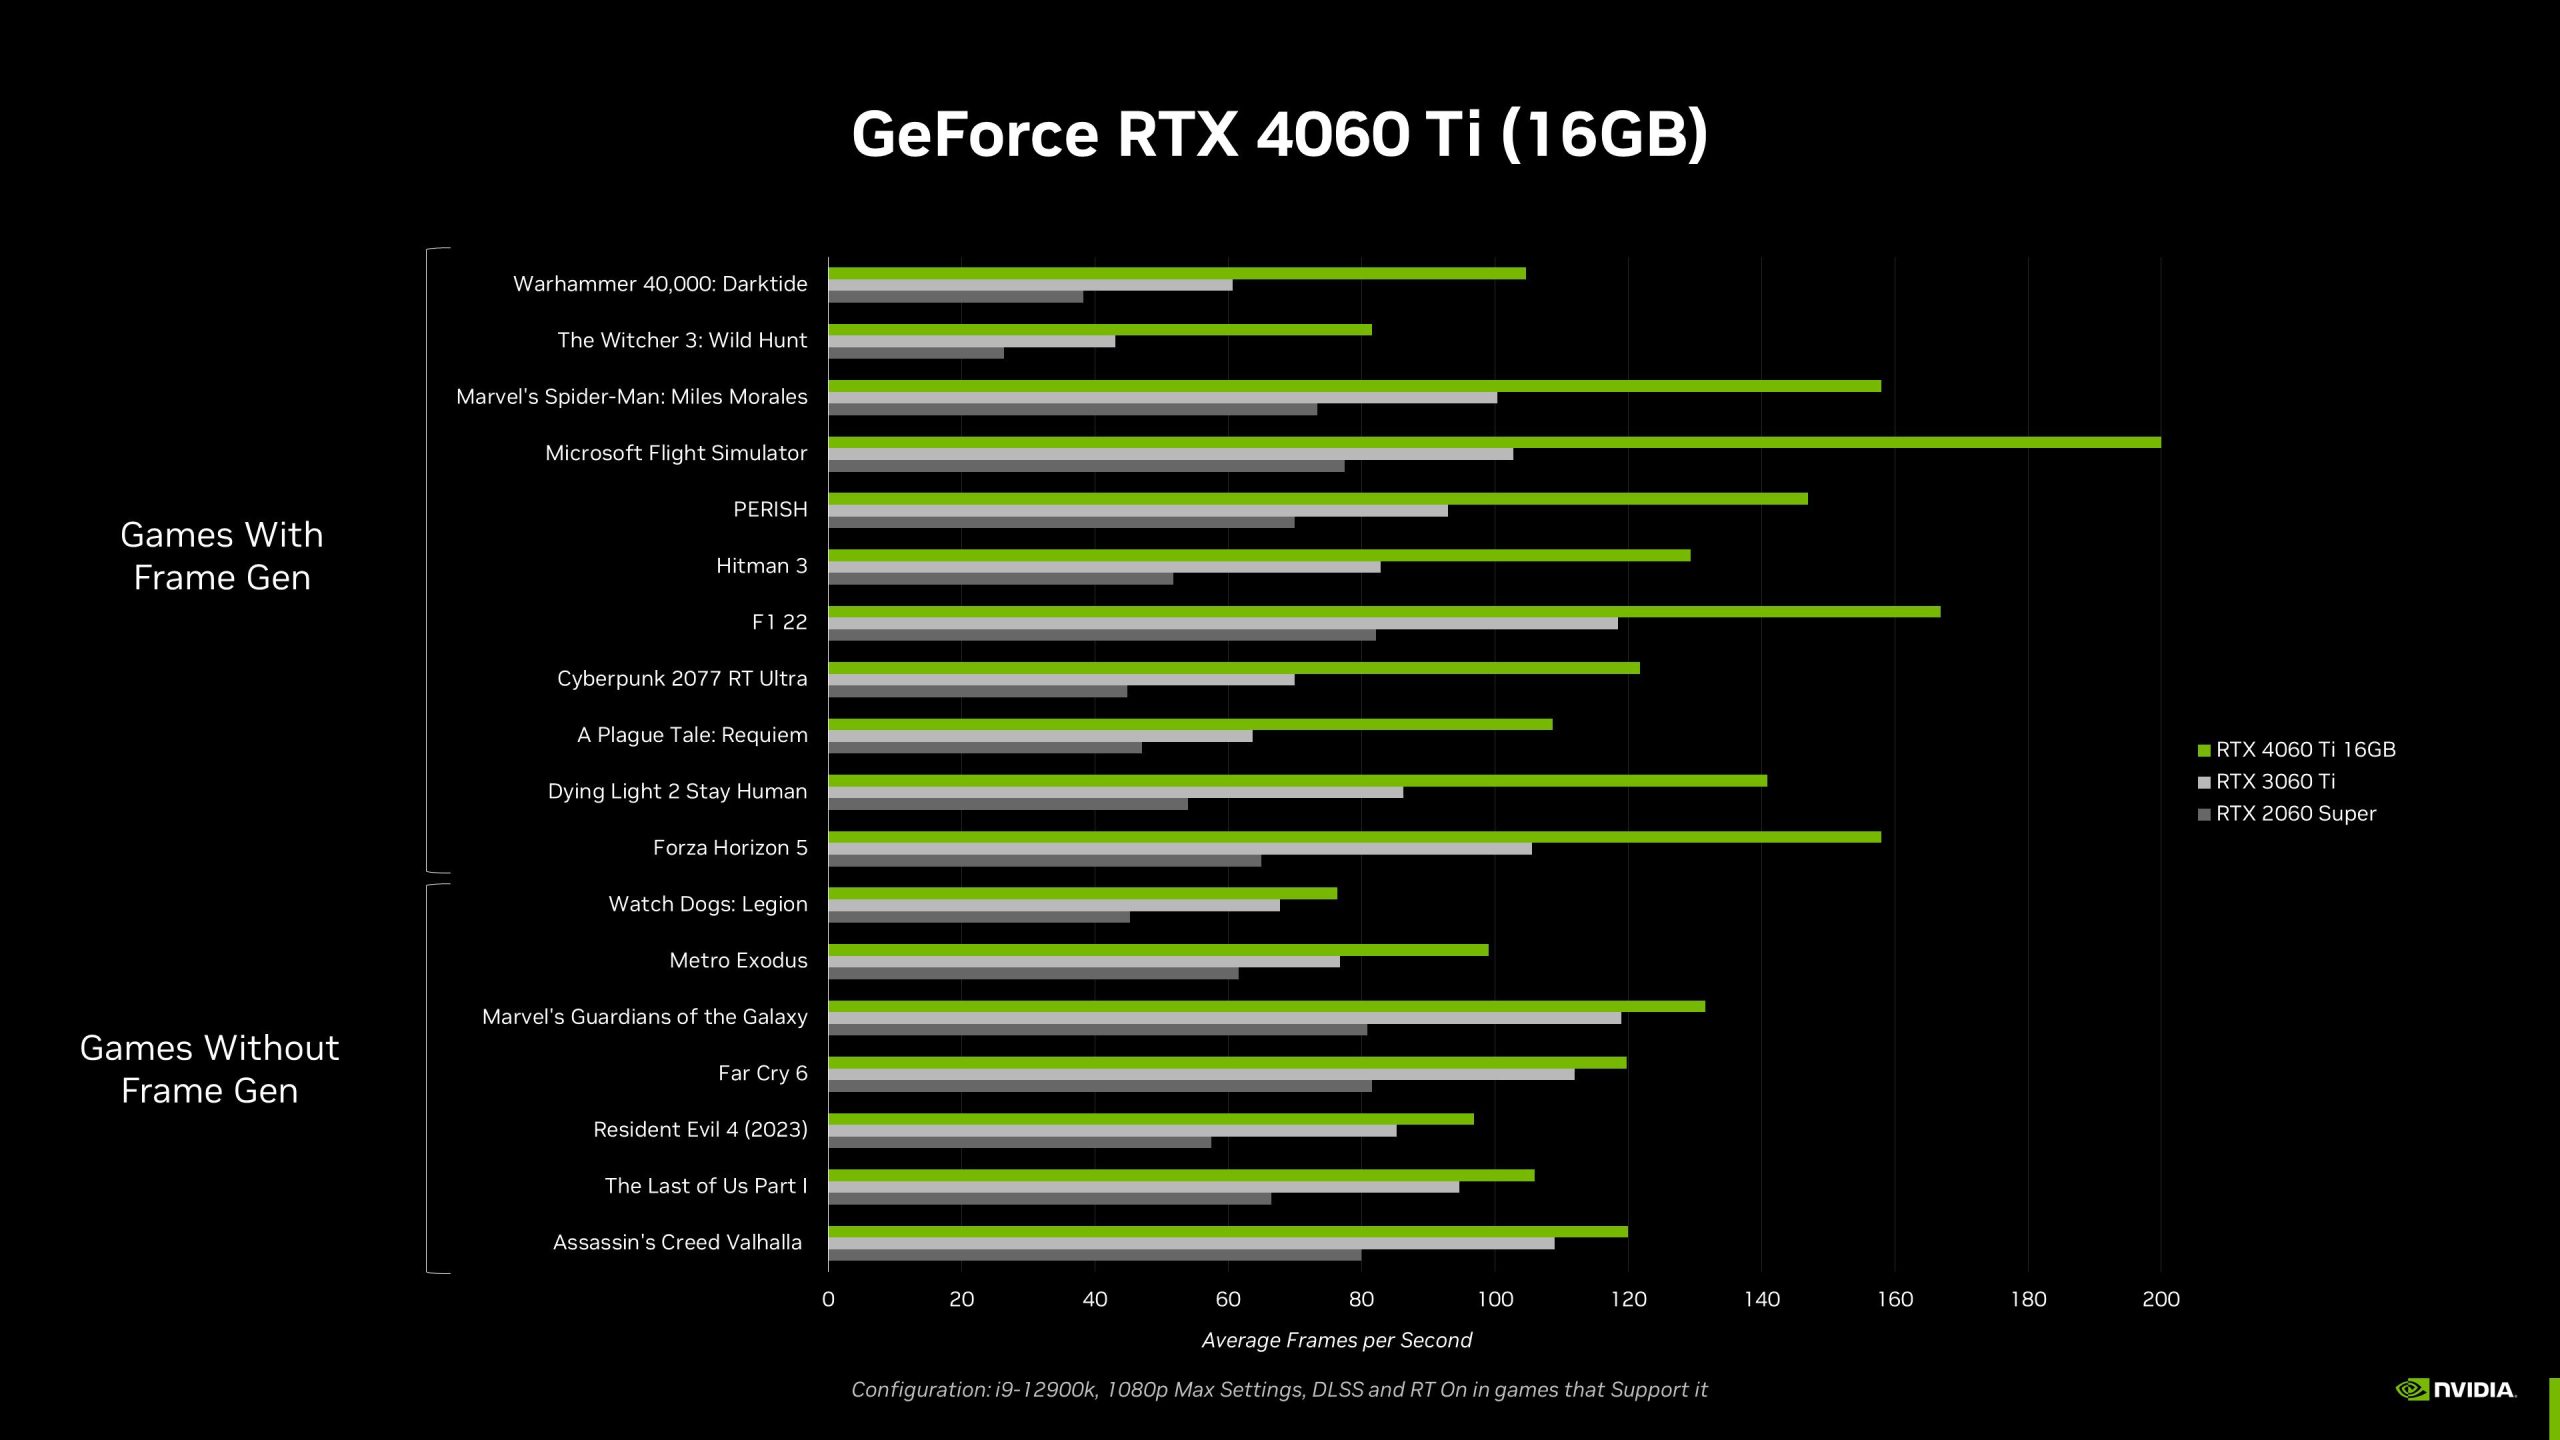 NVIDIA Announces GeForce RTX 4060 Family Of GPUs With Up To 16GB VRAM & Starting Price of $299 7